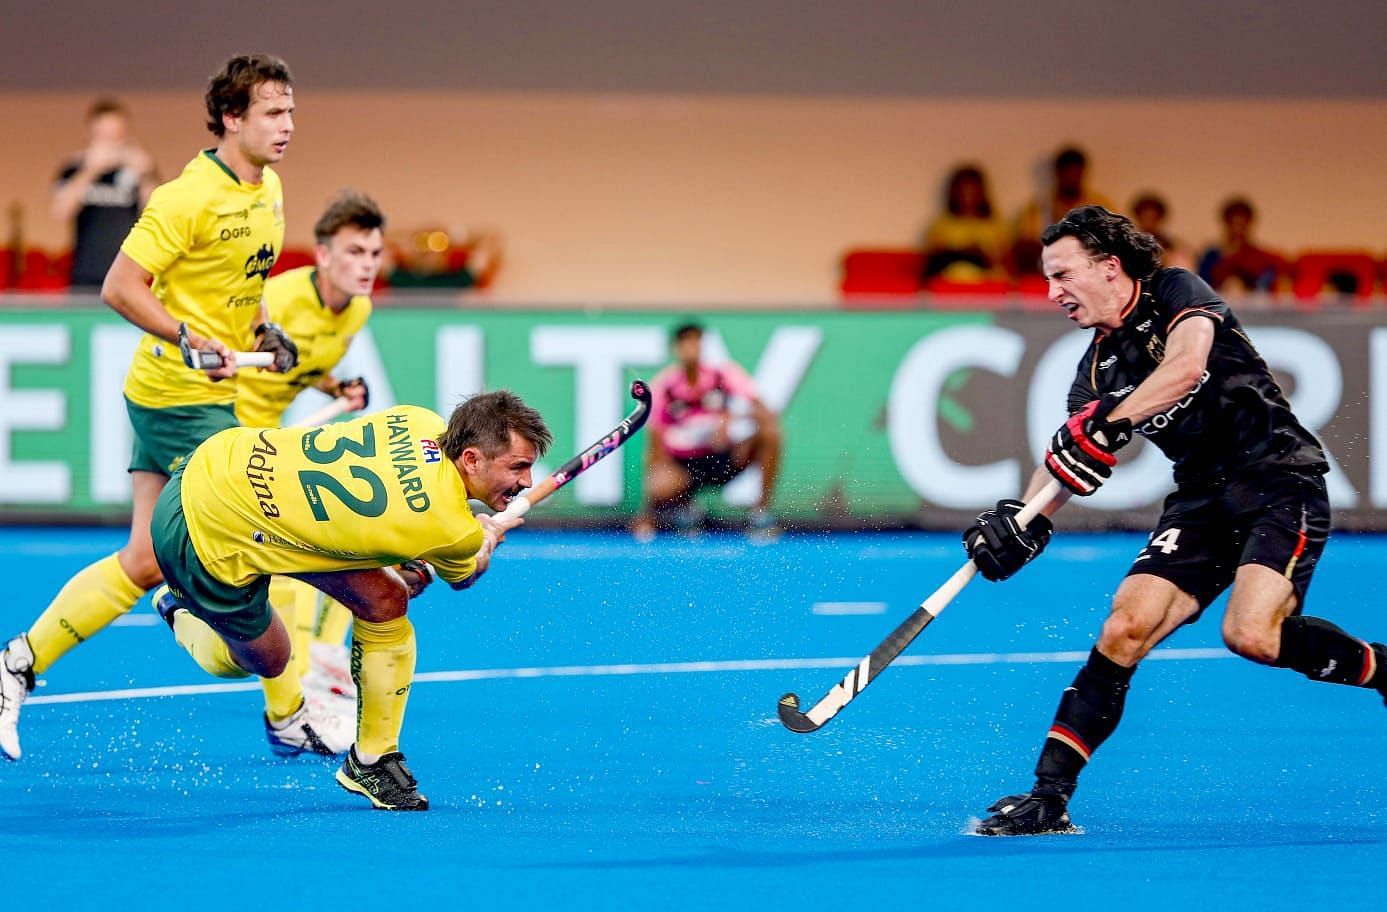 Australia and Germany teams in action in an earlier match (Image Courtesy: Twitter/Hockey India)